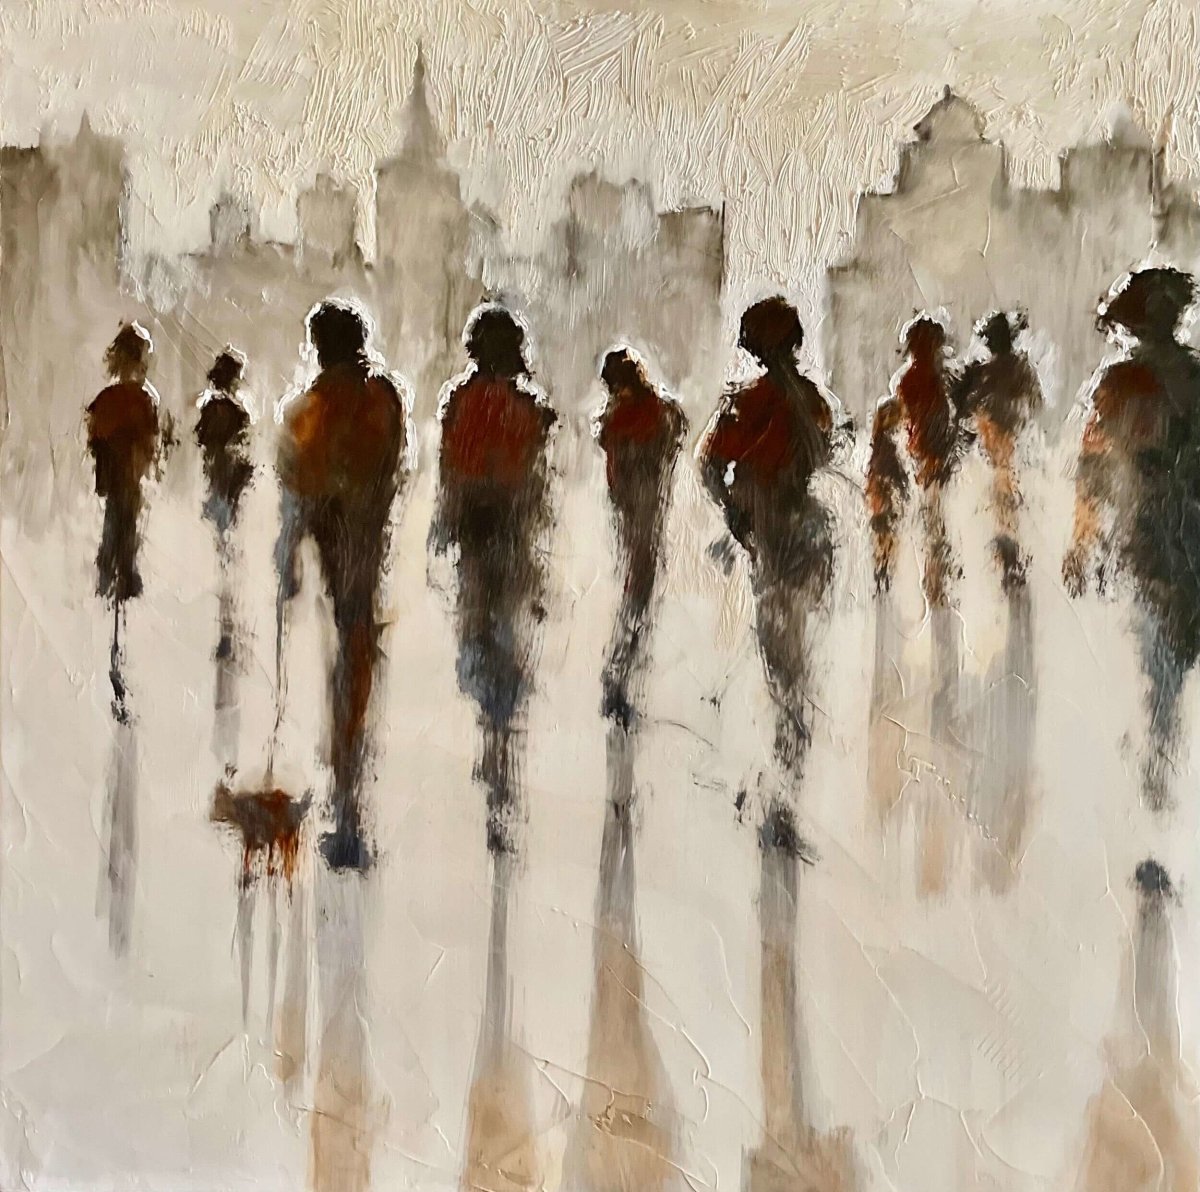 That’s My Cousin by Betsy Havens at LePrince Galleries